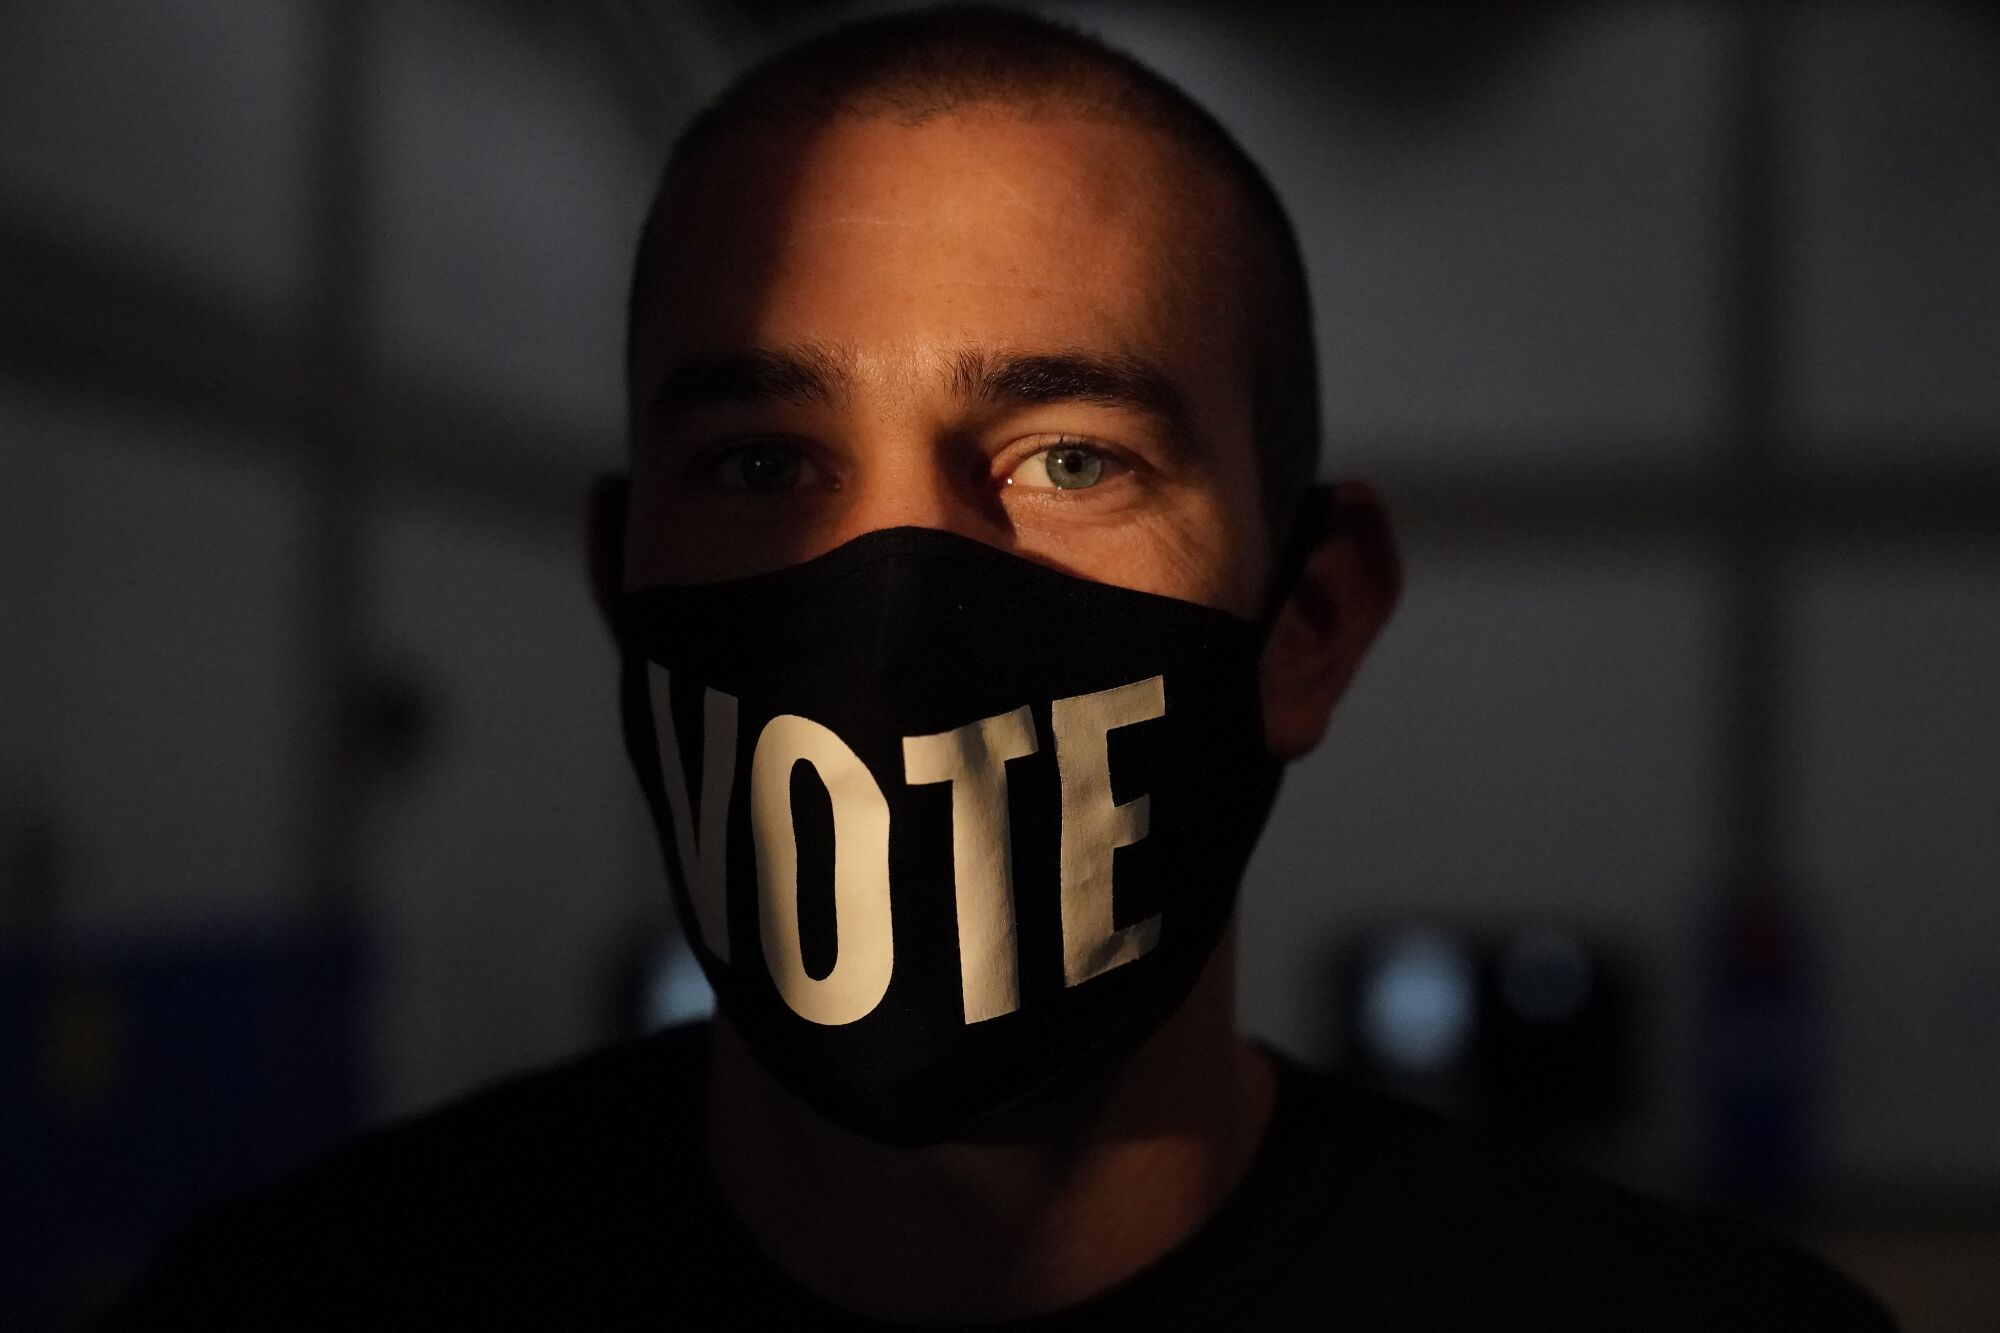 A closeup of a person wearing a mask that says "Vote."